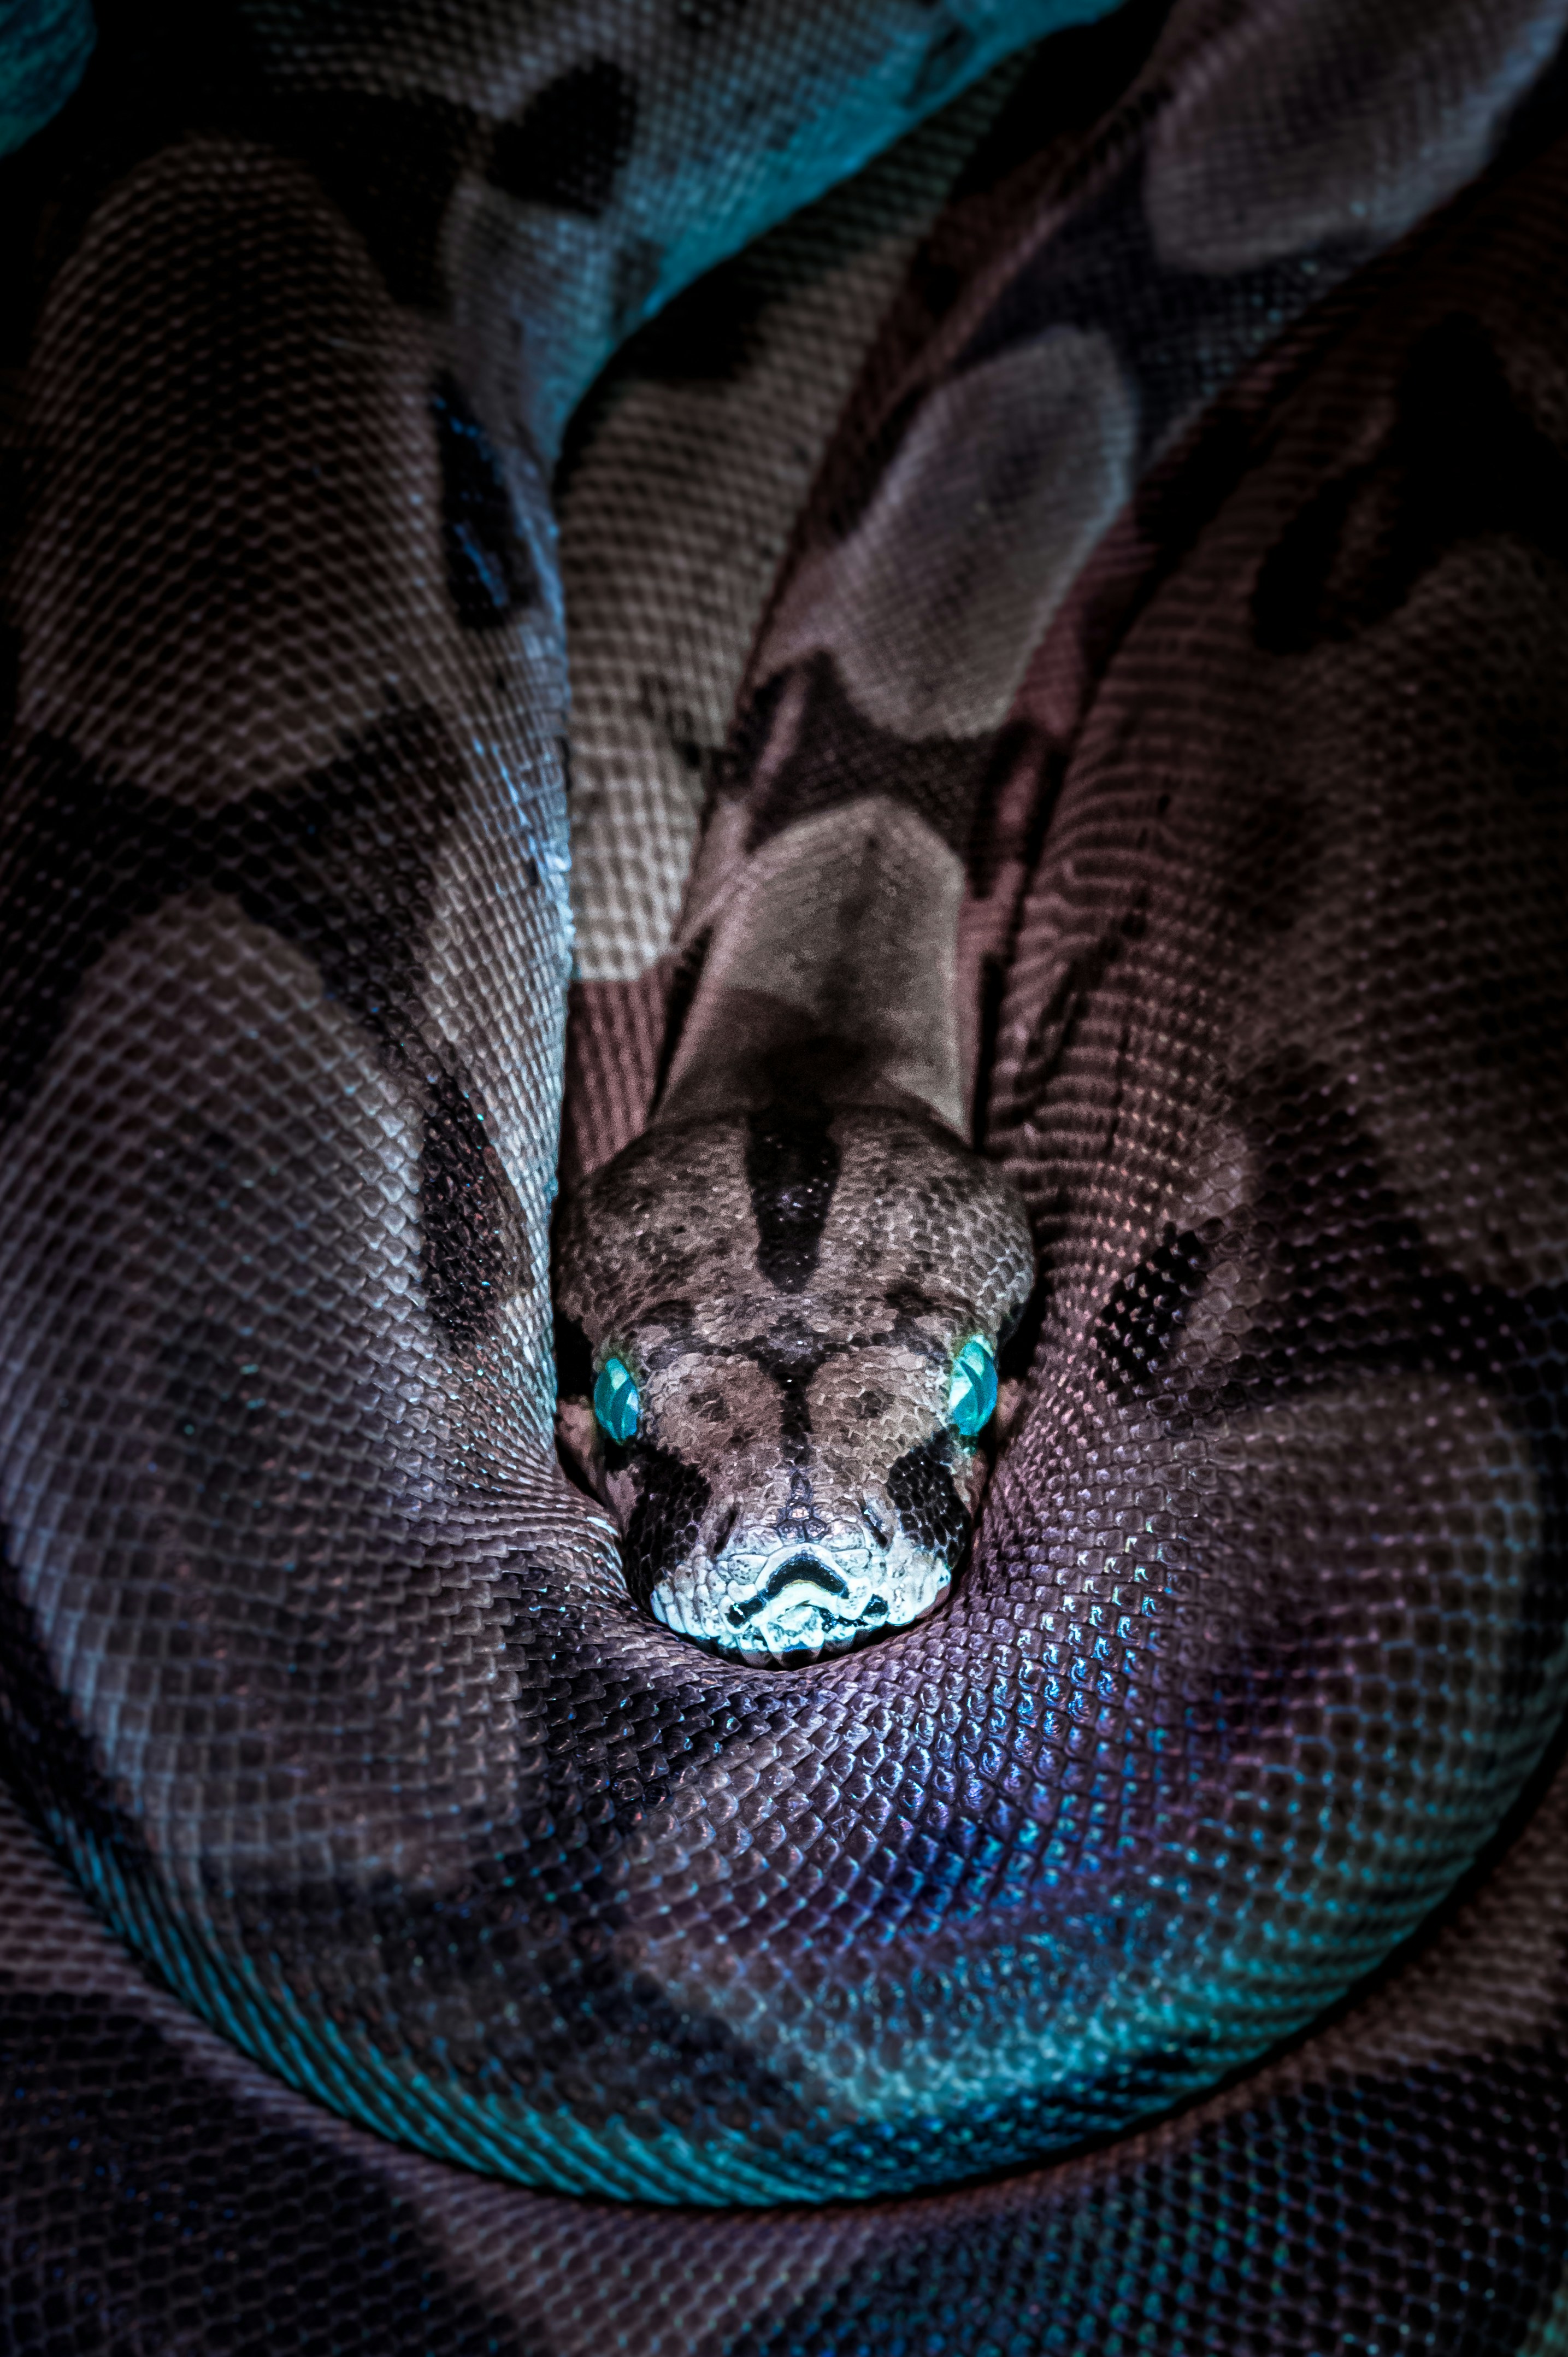 Wallpaper for iPhone - Boa Constrictor before the shedding